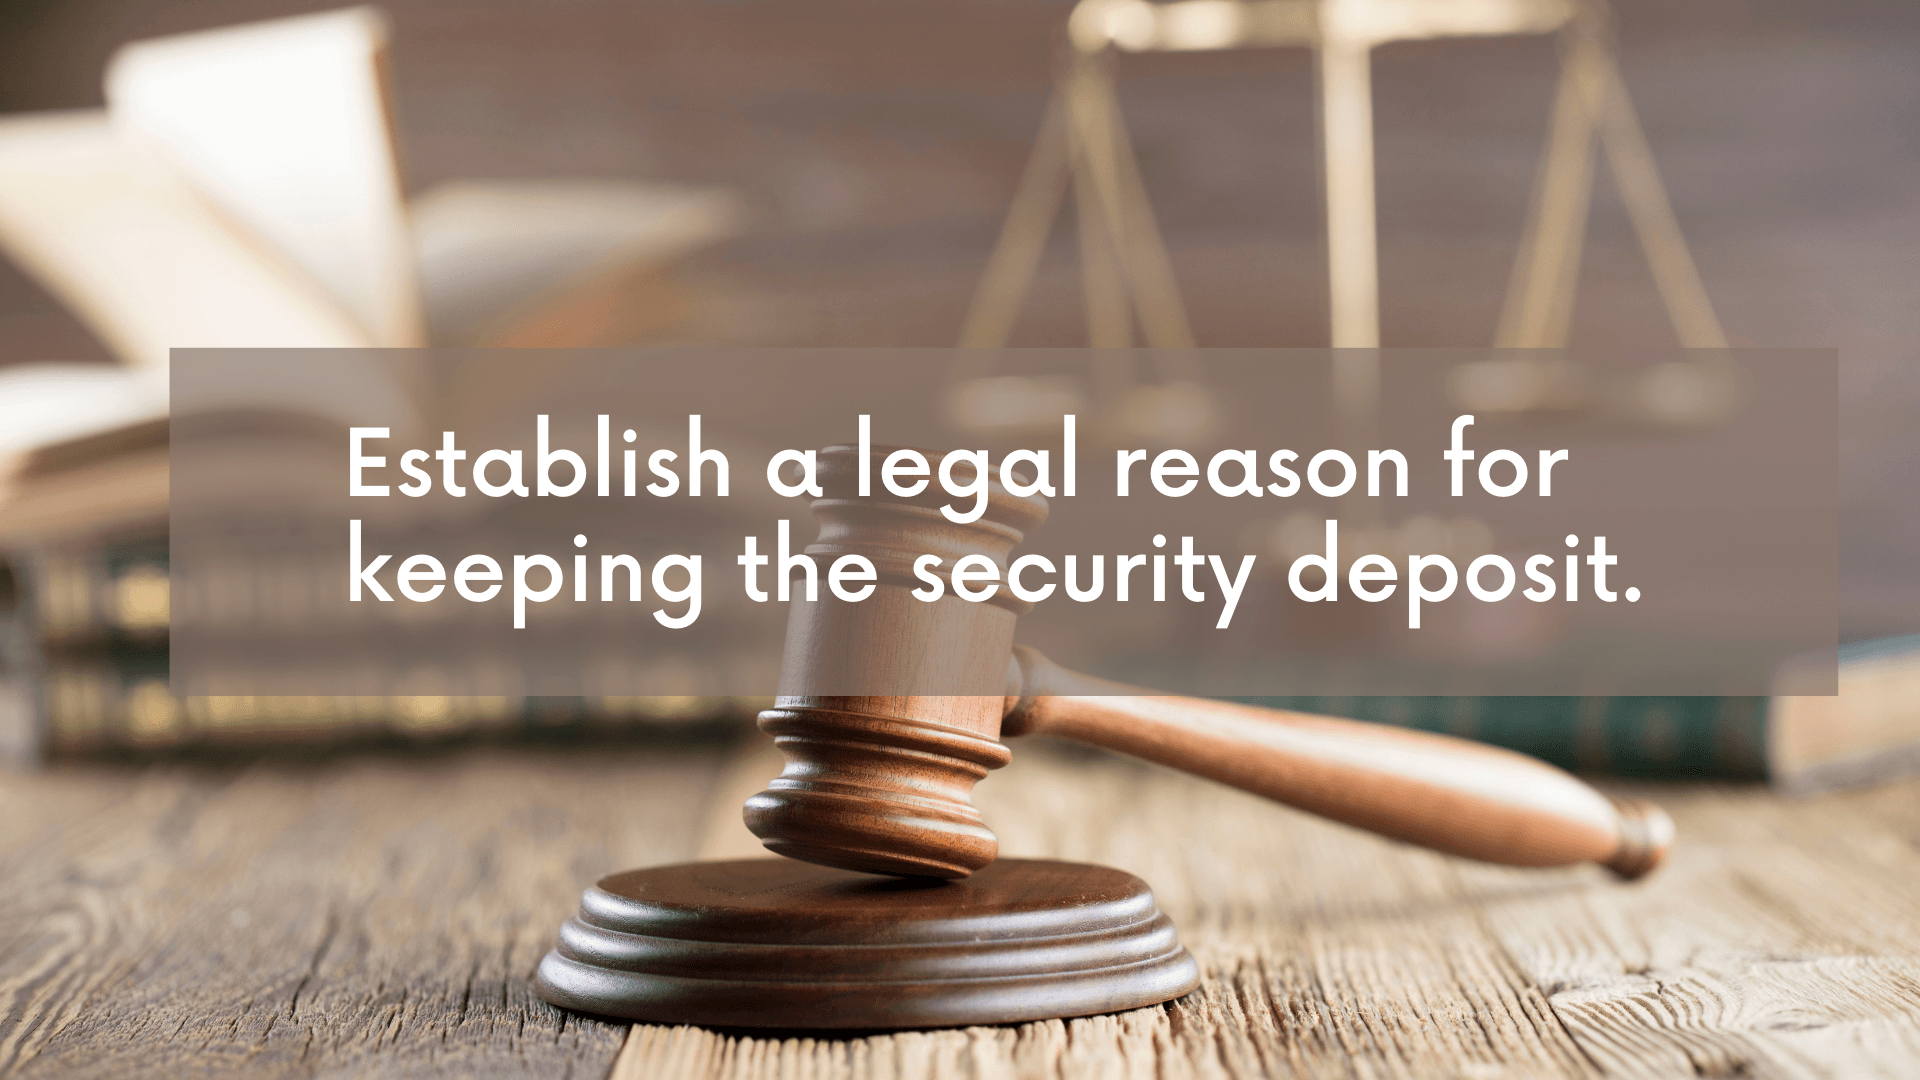 Establish a legal reason for keeping the security deposit.